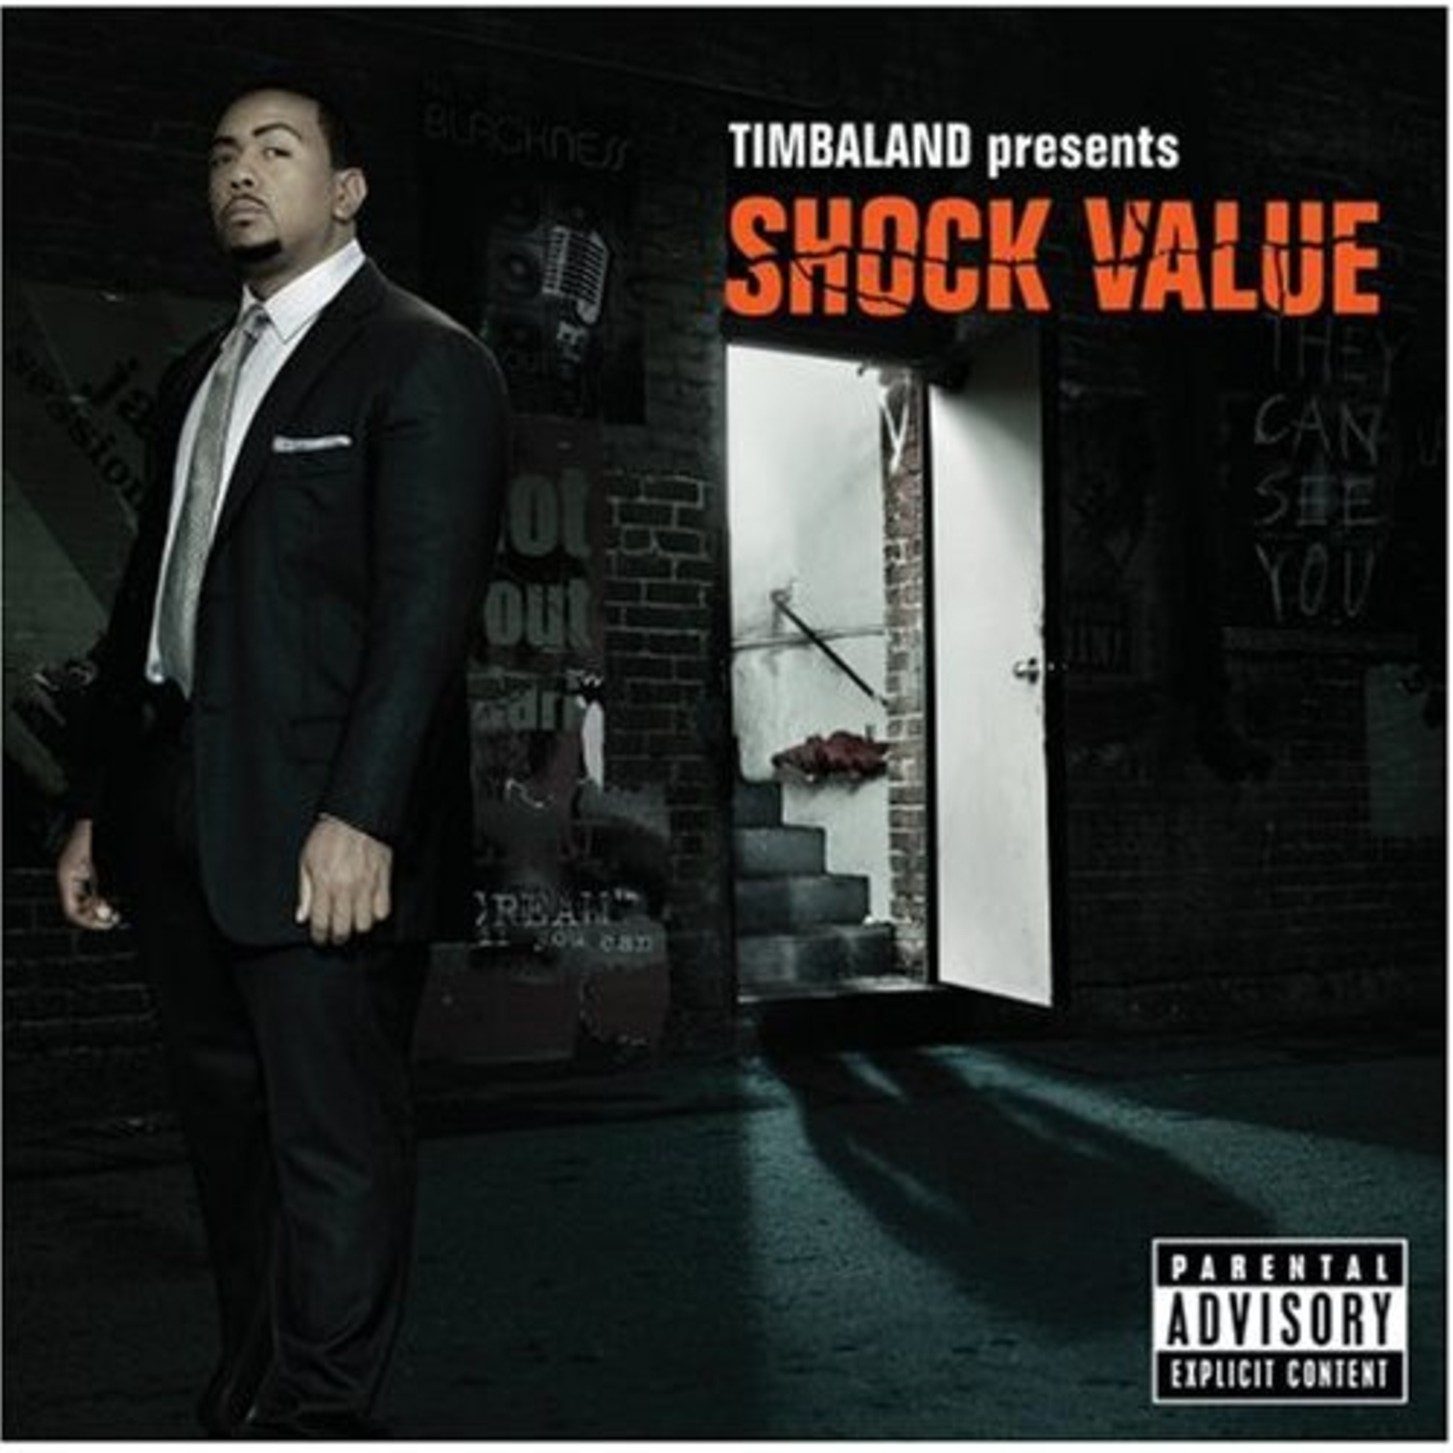 timbaland presents shock value image